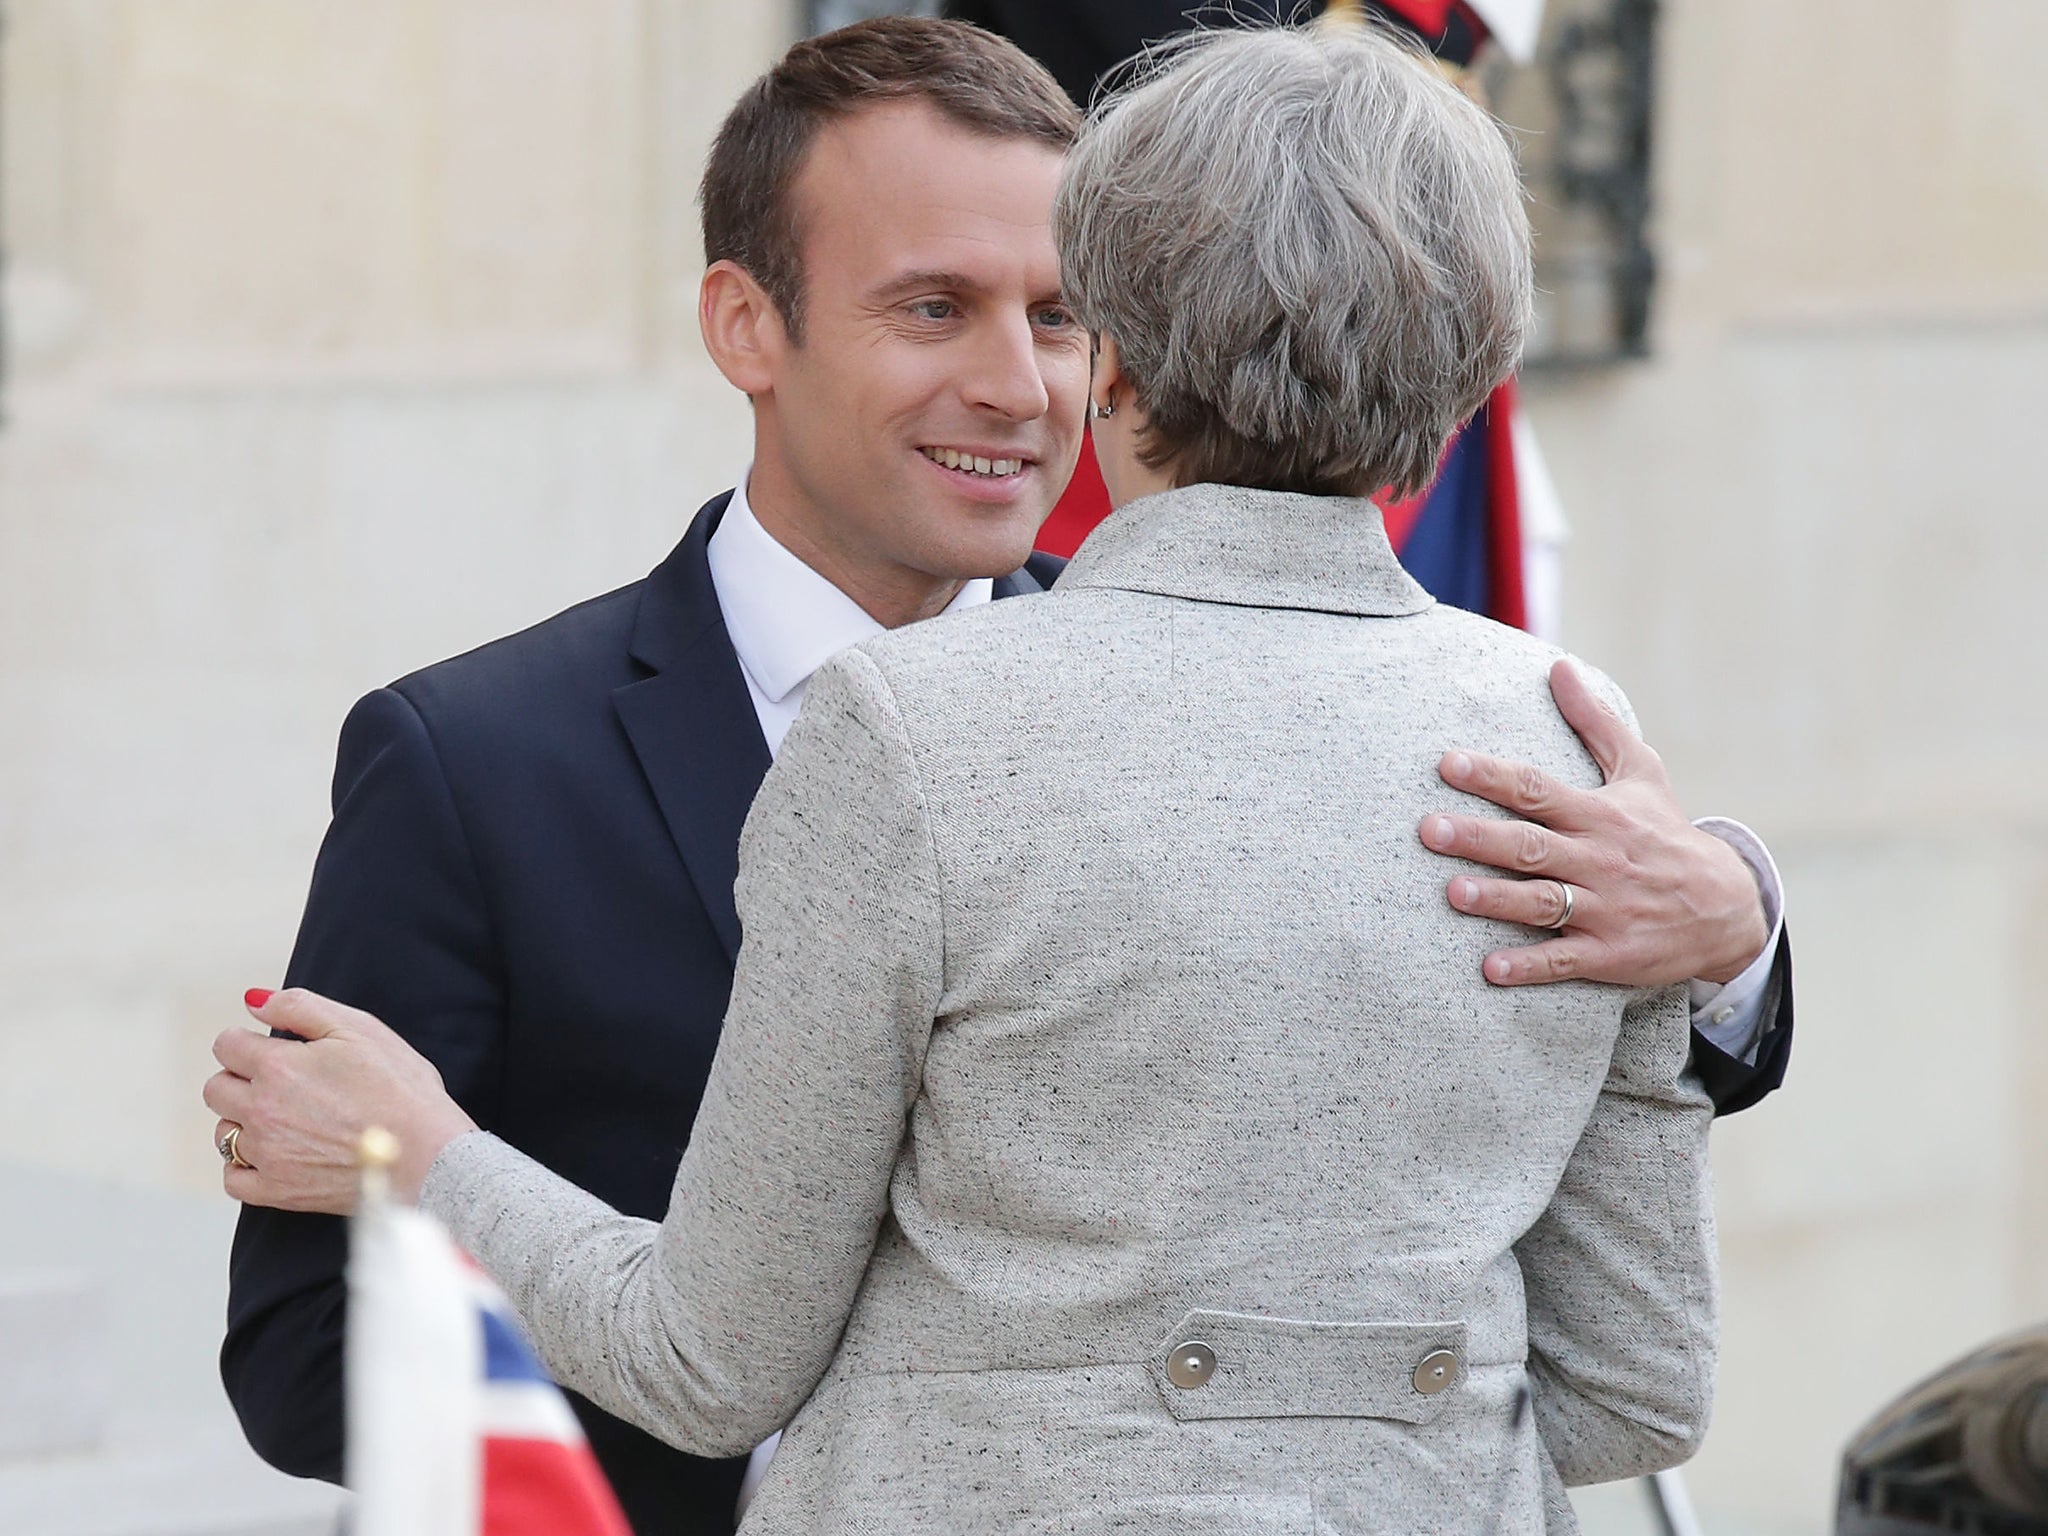 Emmanuel Macron has said that remaining in the EU is on the table for the UK